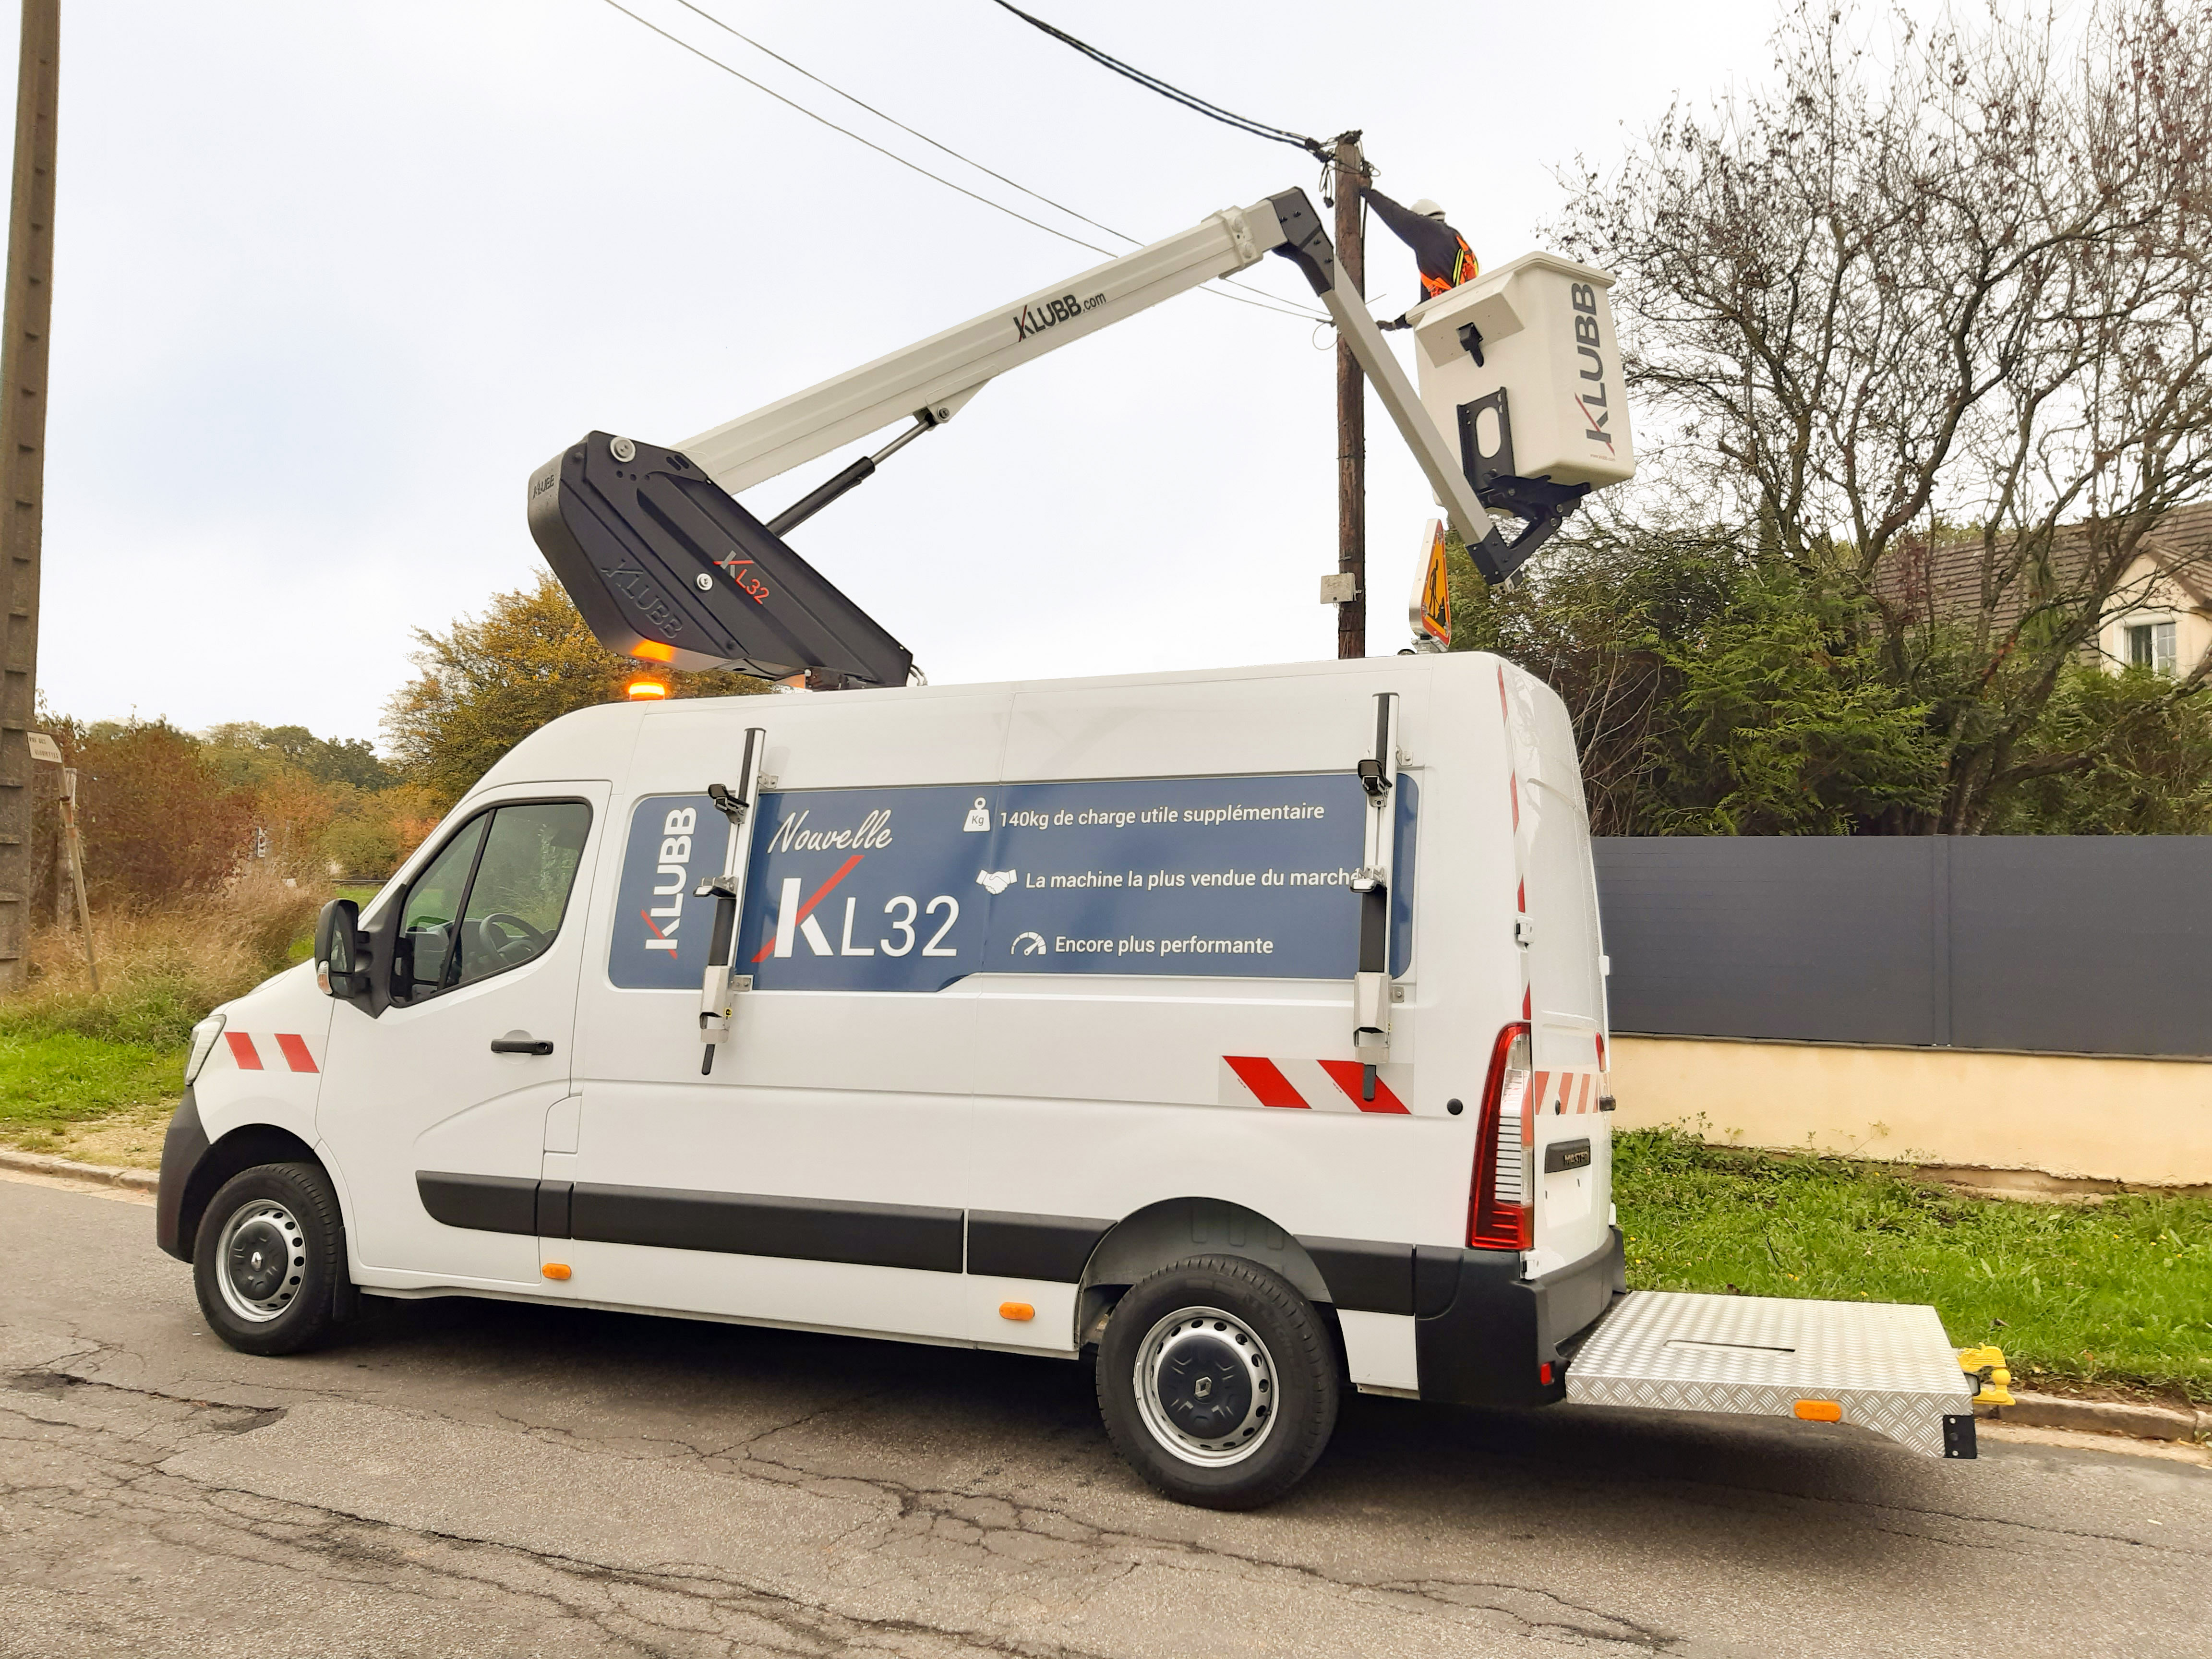 A significant gain in payload with the Klubb aerial work platforms light range!